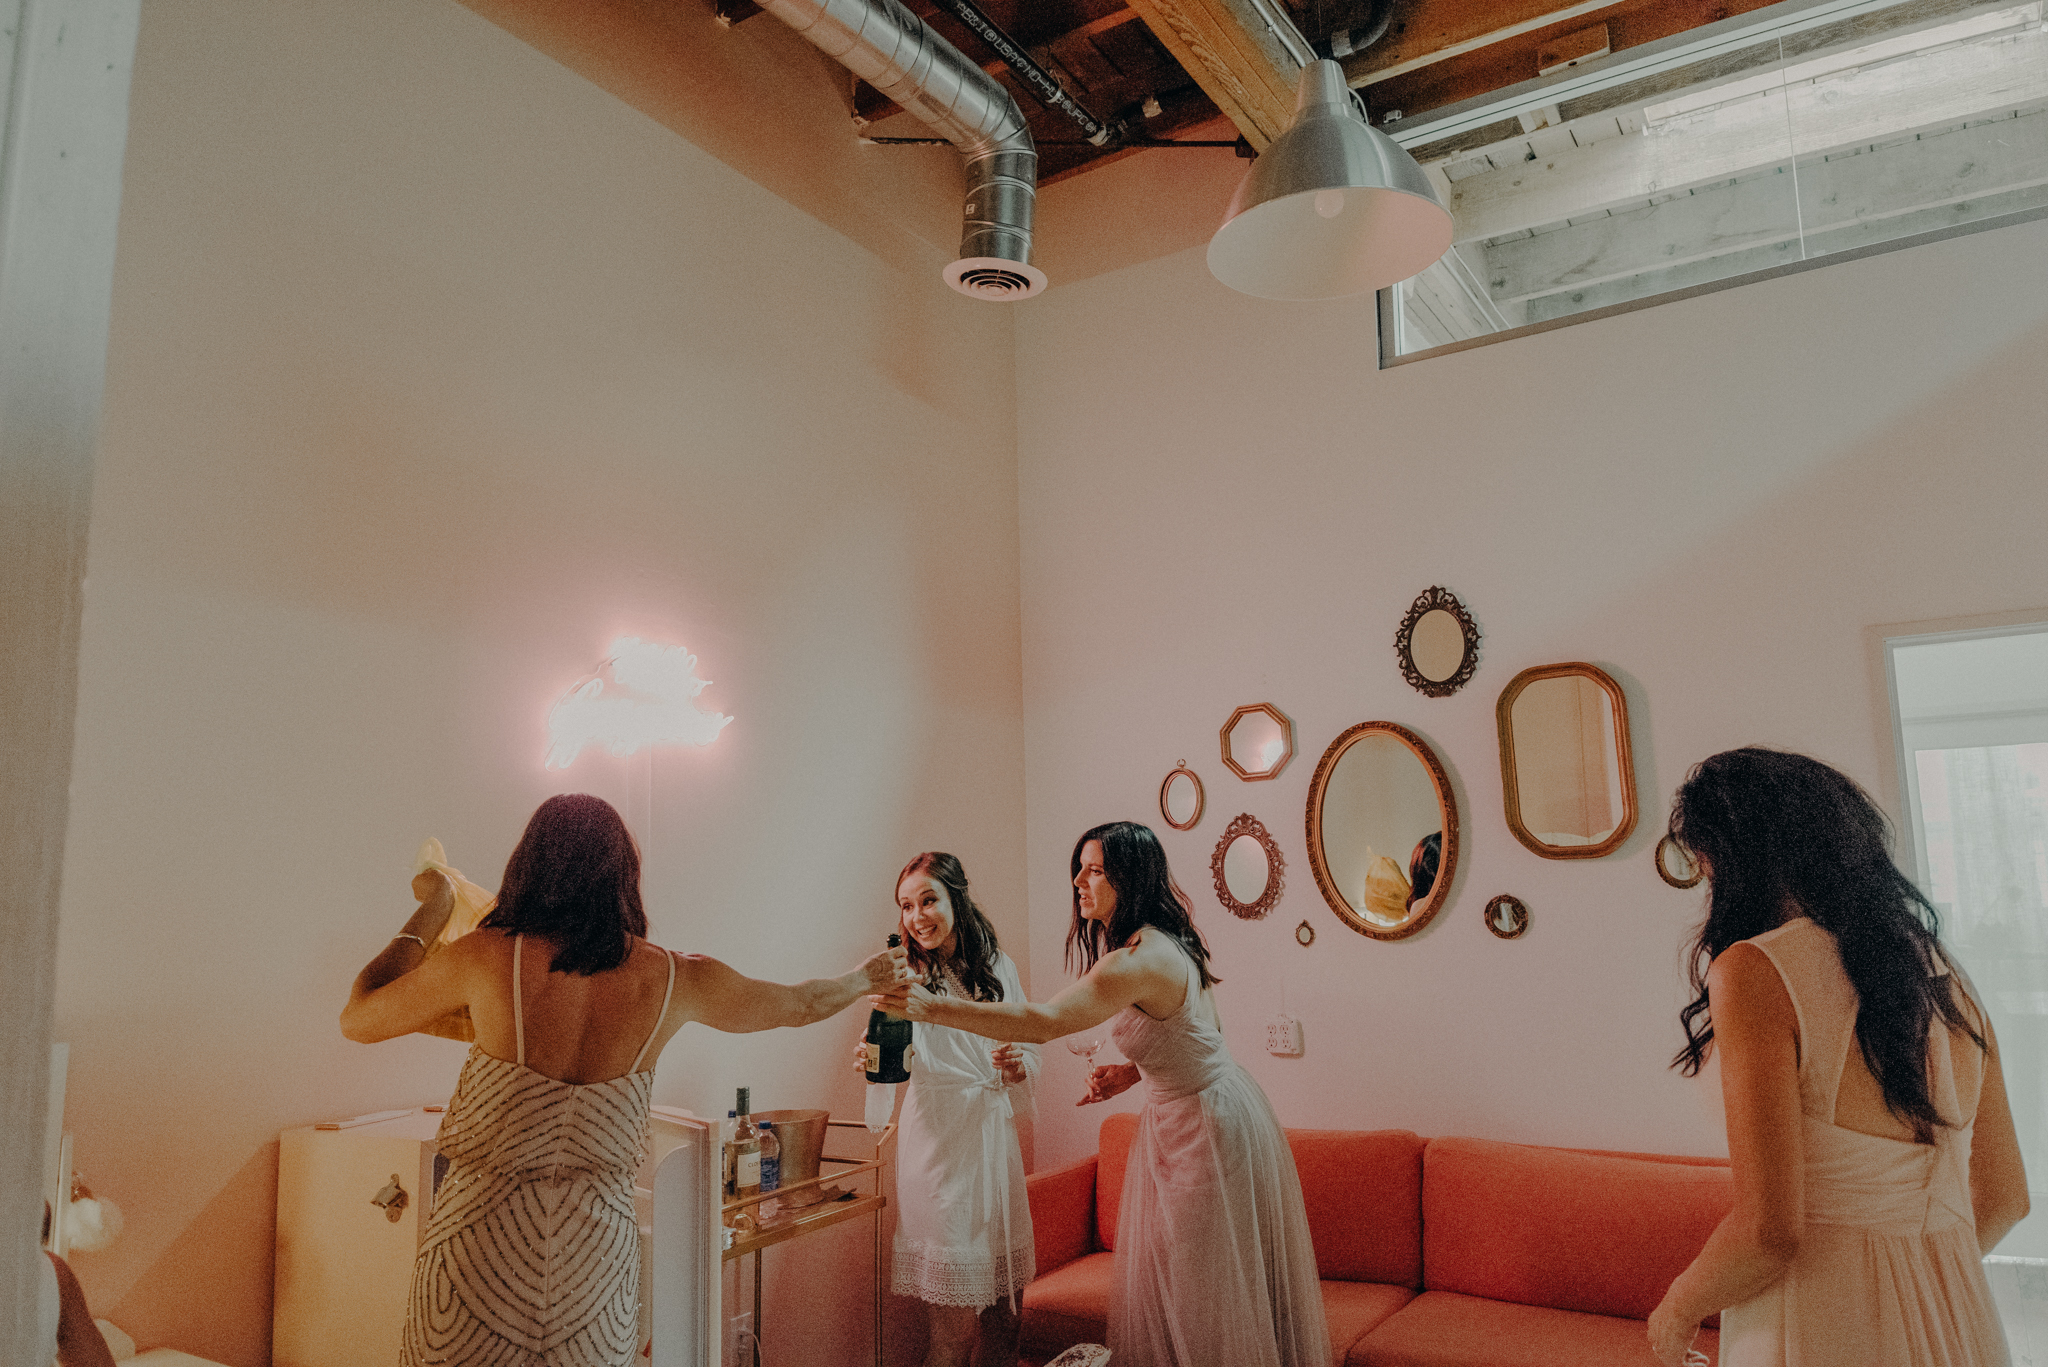 The Unique Space Wedding Photographer - Los Angeles Wedding Photography - IsaiahAndTaylor.com-012.jpg